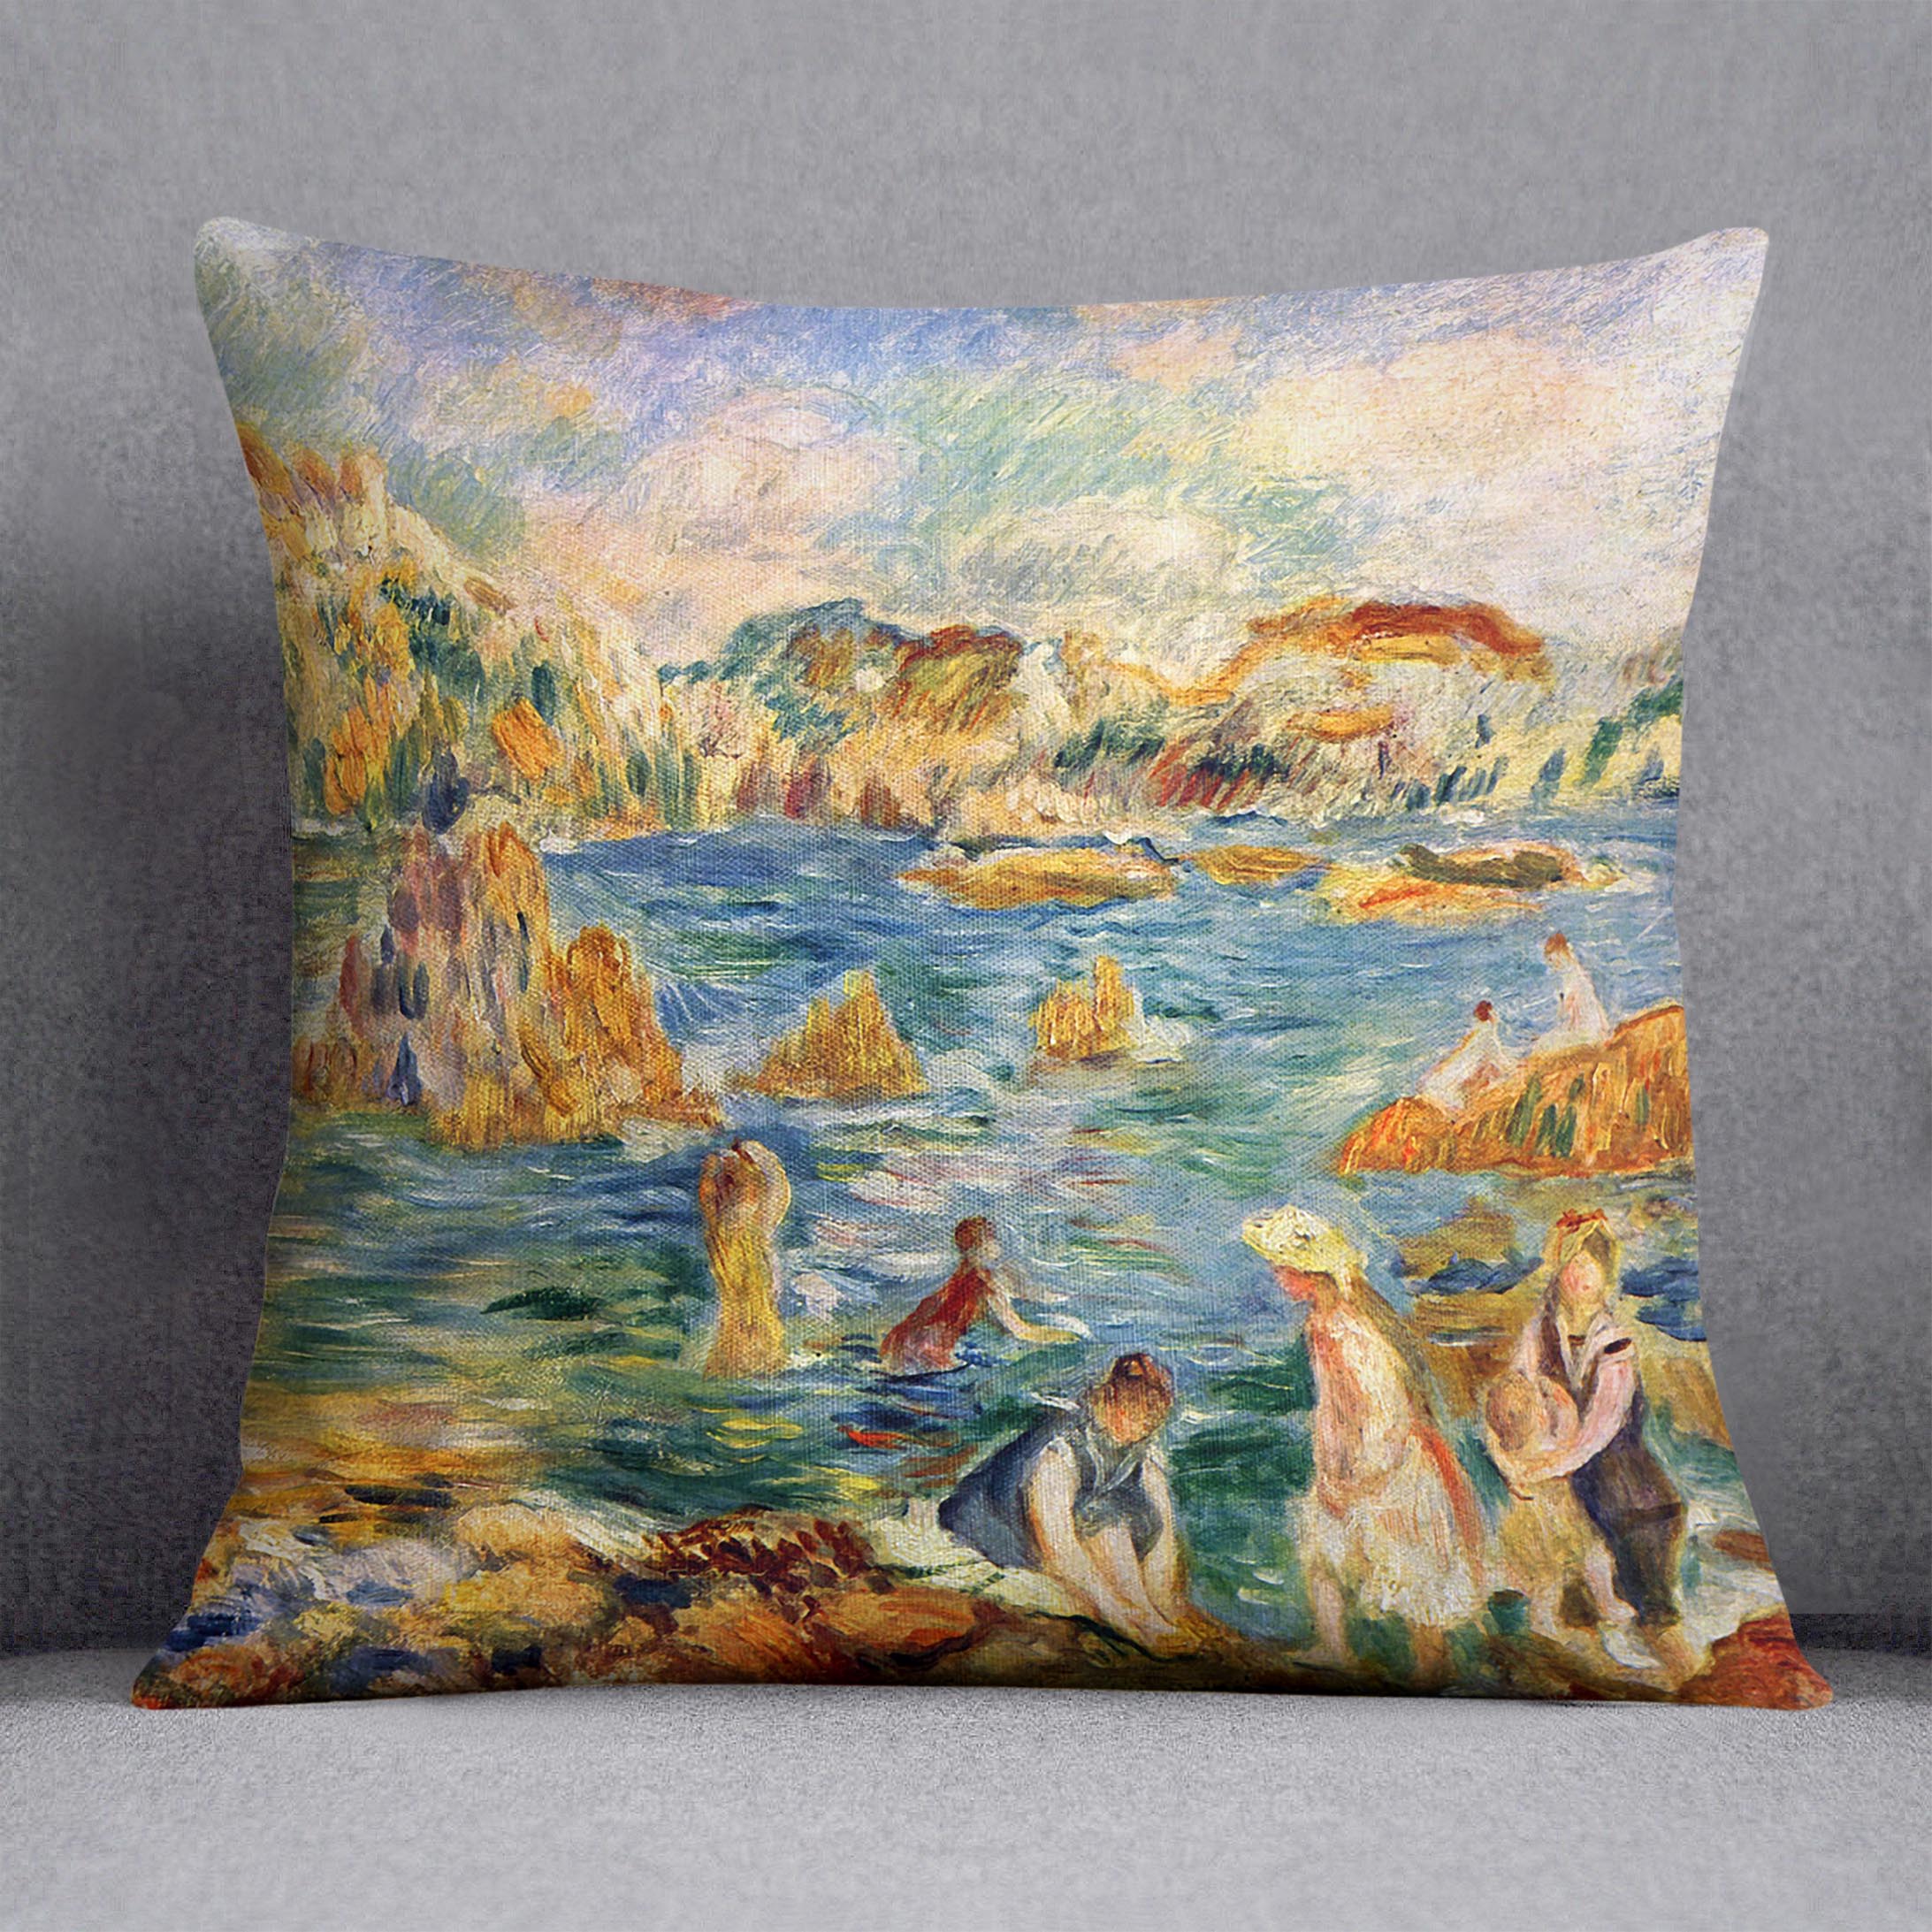 At the beach of Guernesey by Renoir Cushion